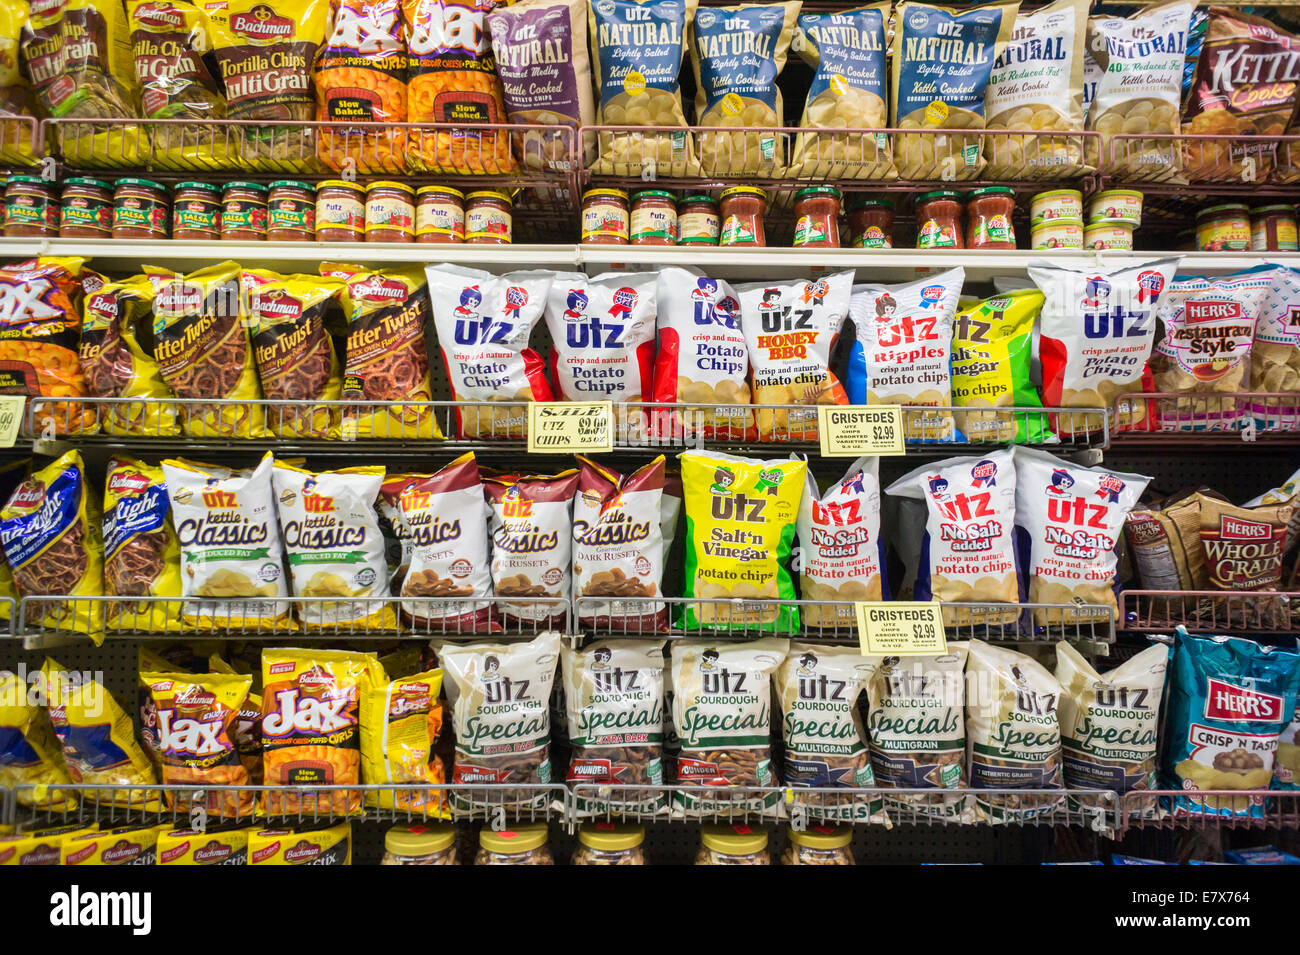 A display of tasty snacks including Utz brand products are seen in a supermarket in New York Stock Photo